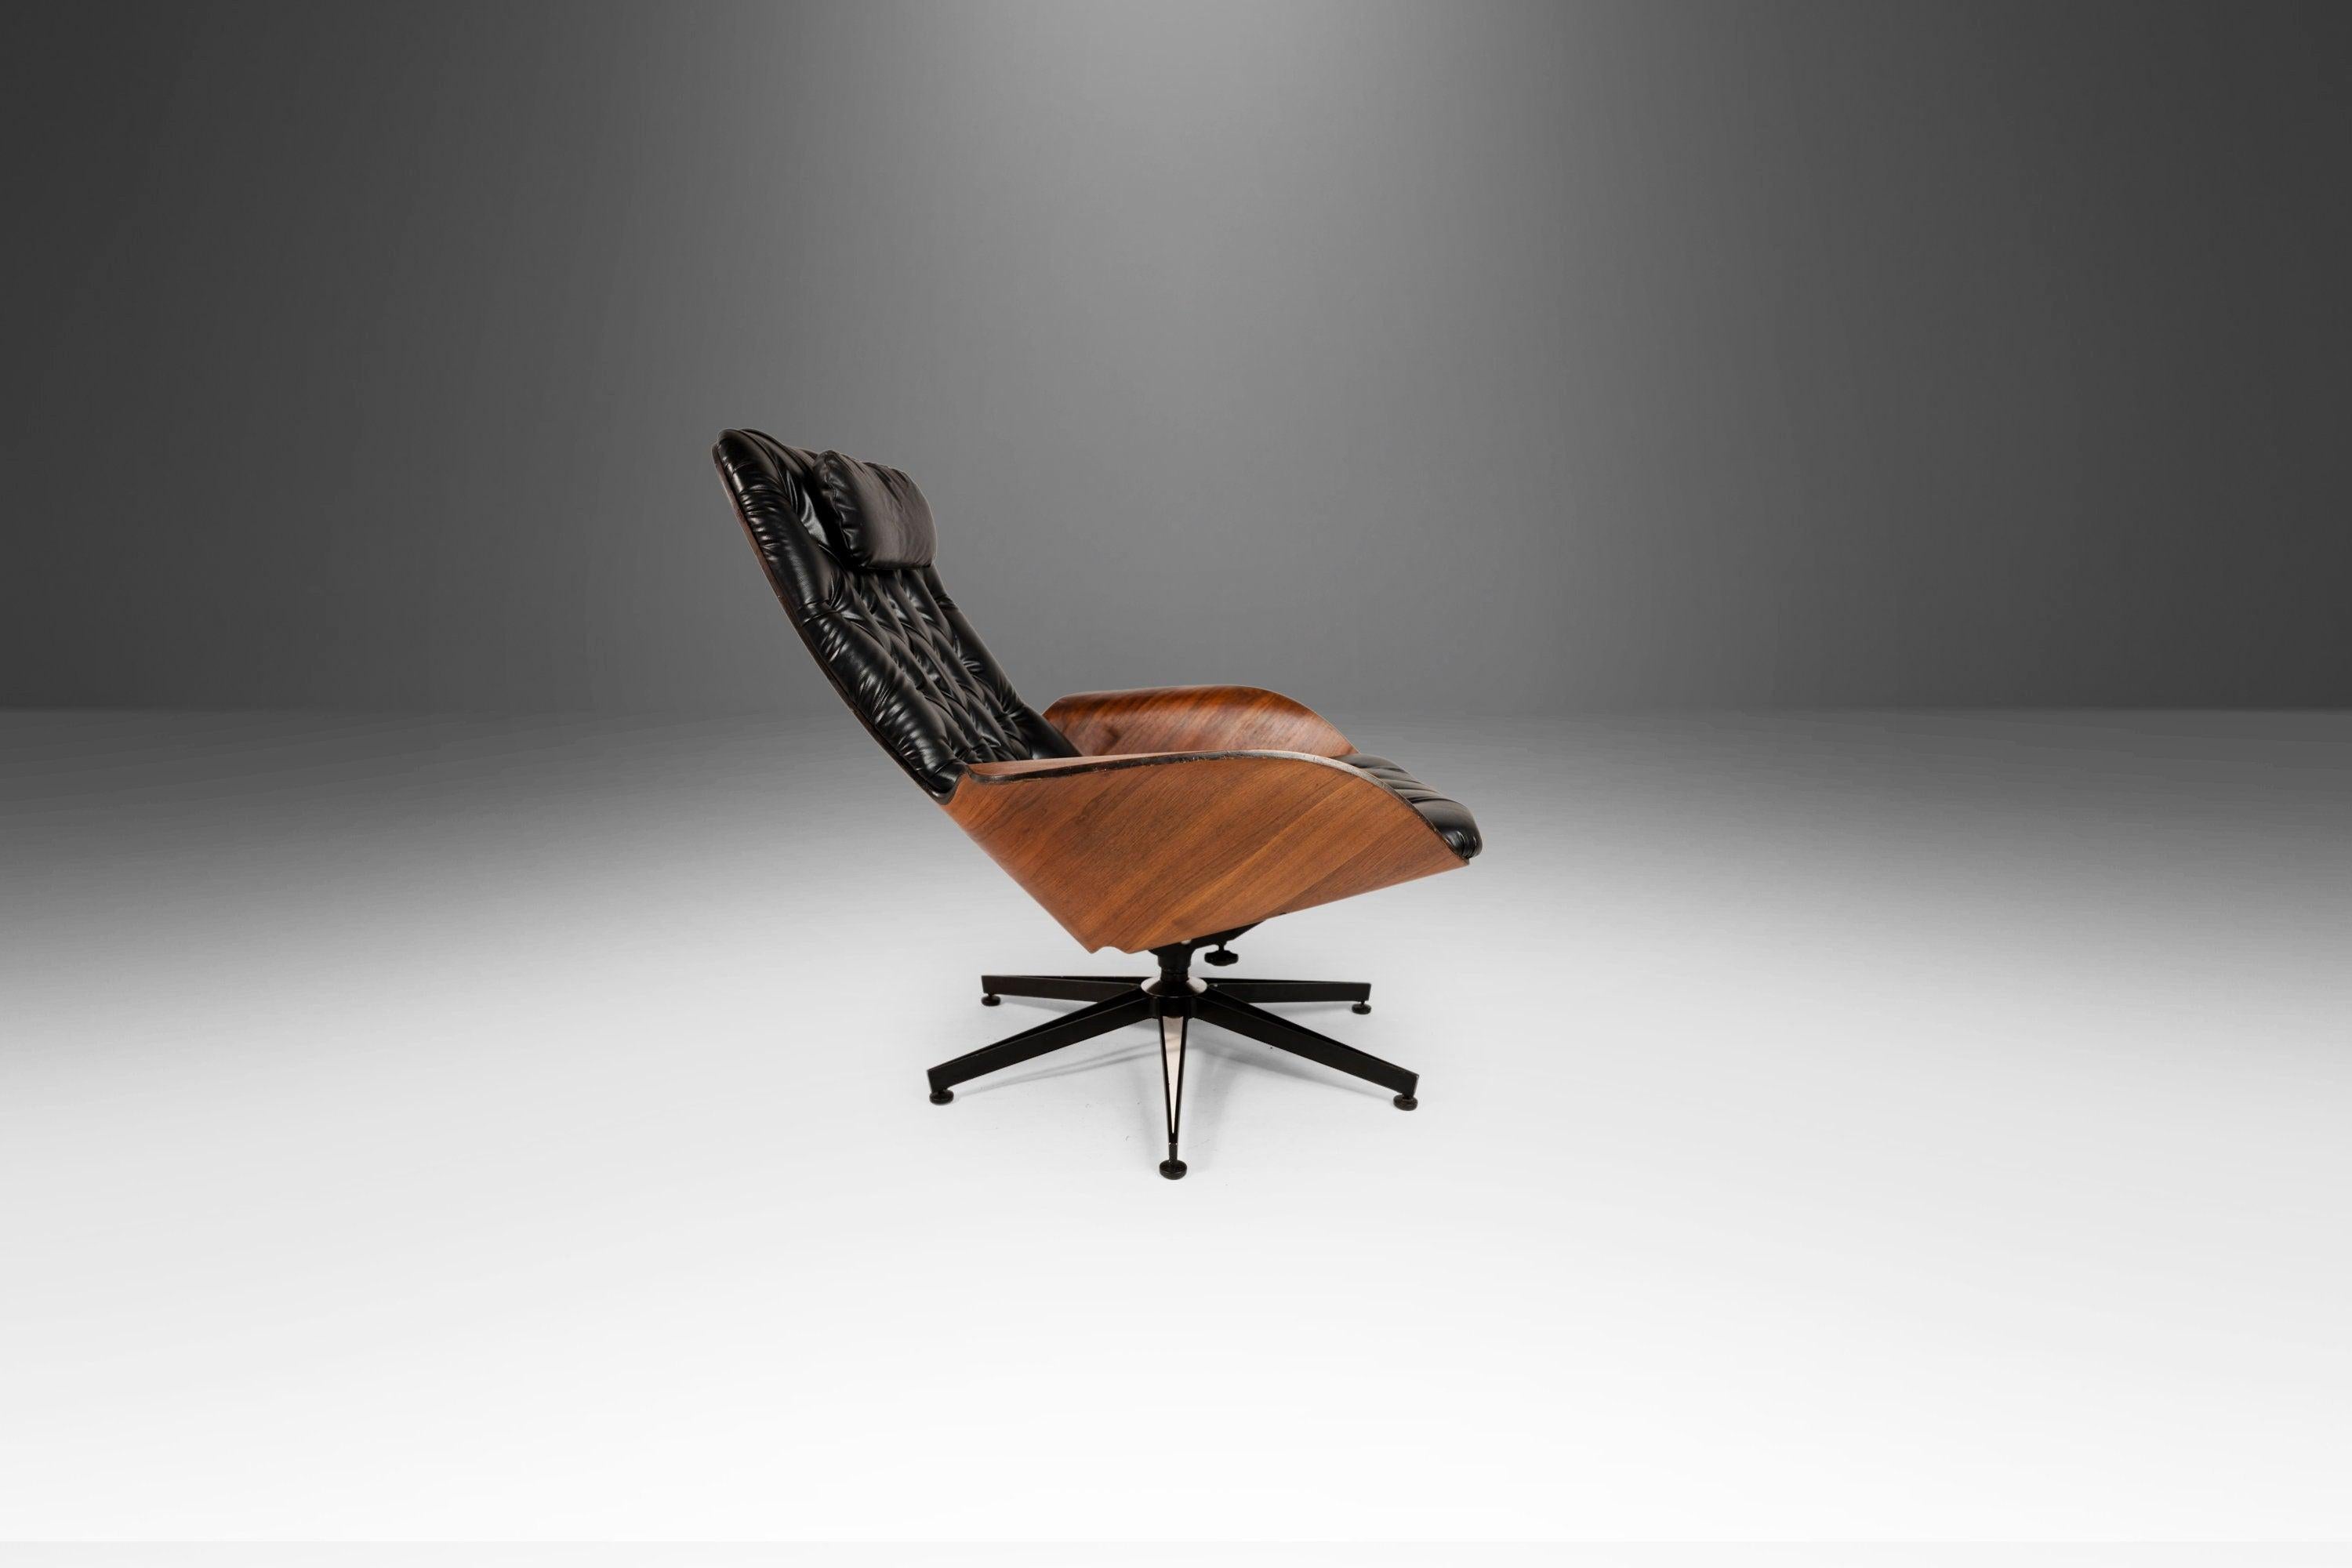 Equal parts comfort and style this iconic Mr. Chair, designed by the acclaimed George Mulhauser, is the epitome of functional art. The shell, constructed of audaciously-shaped bent walnut plywood, has become iconic and timeless. Able to recline to a